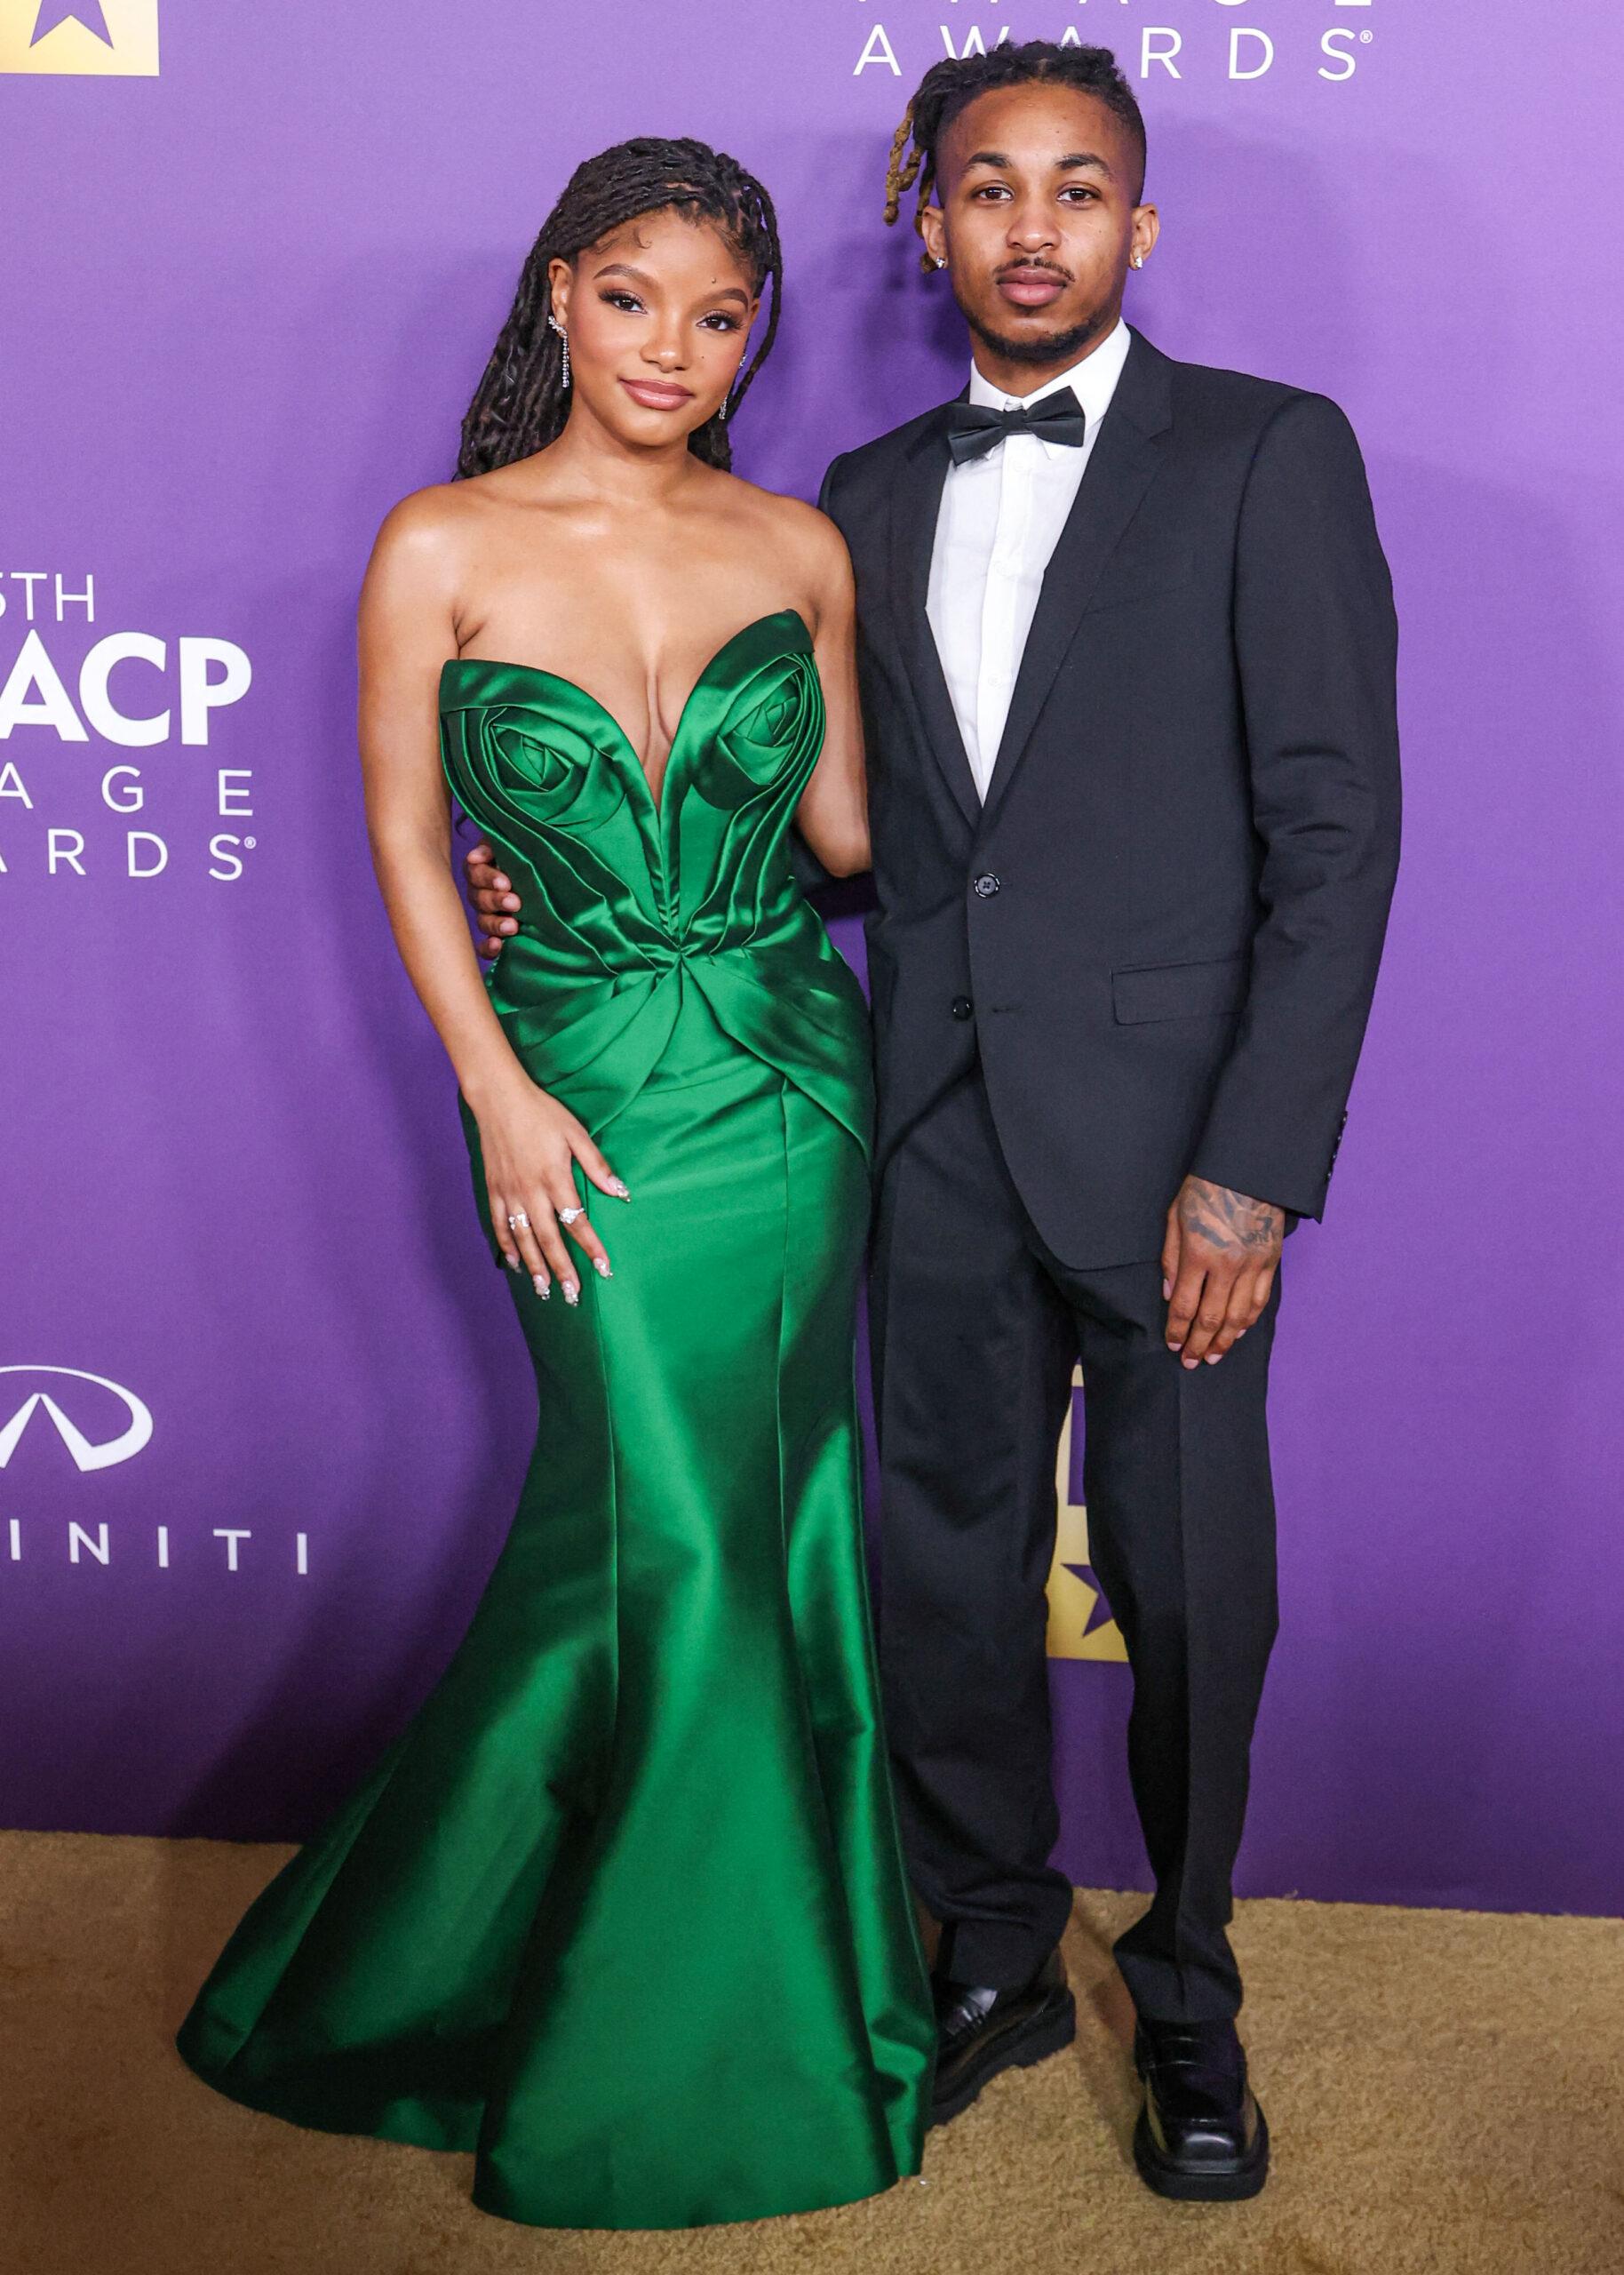 Halle Bailey and DDG attend the 55th Annual NAACP Image Awards